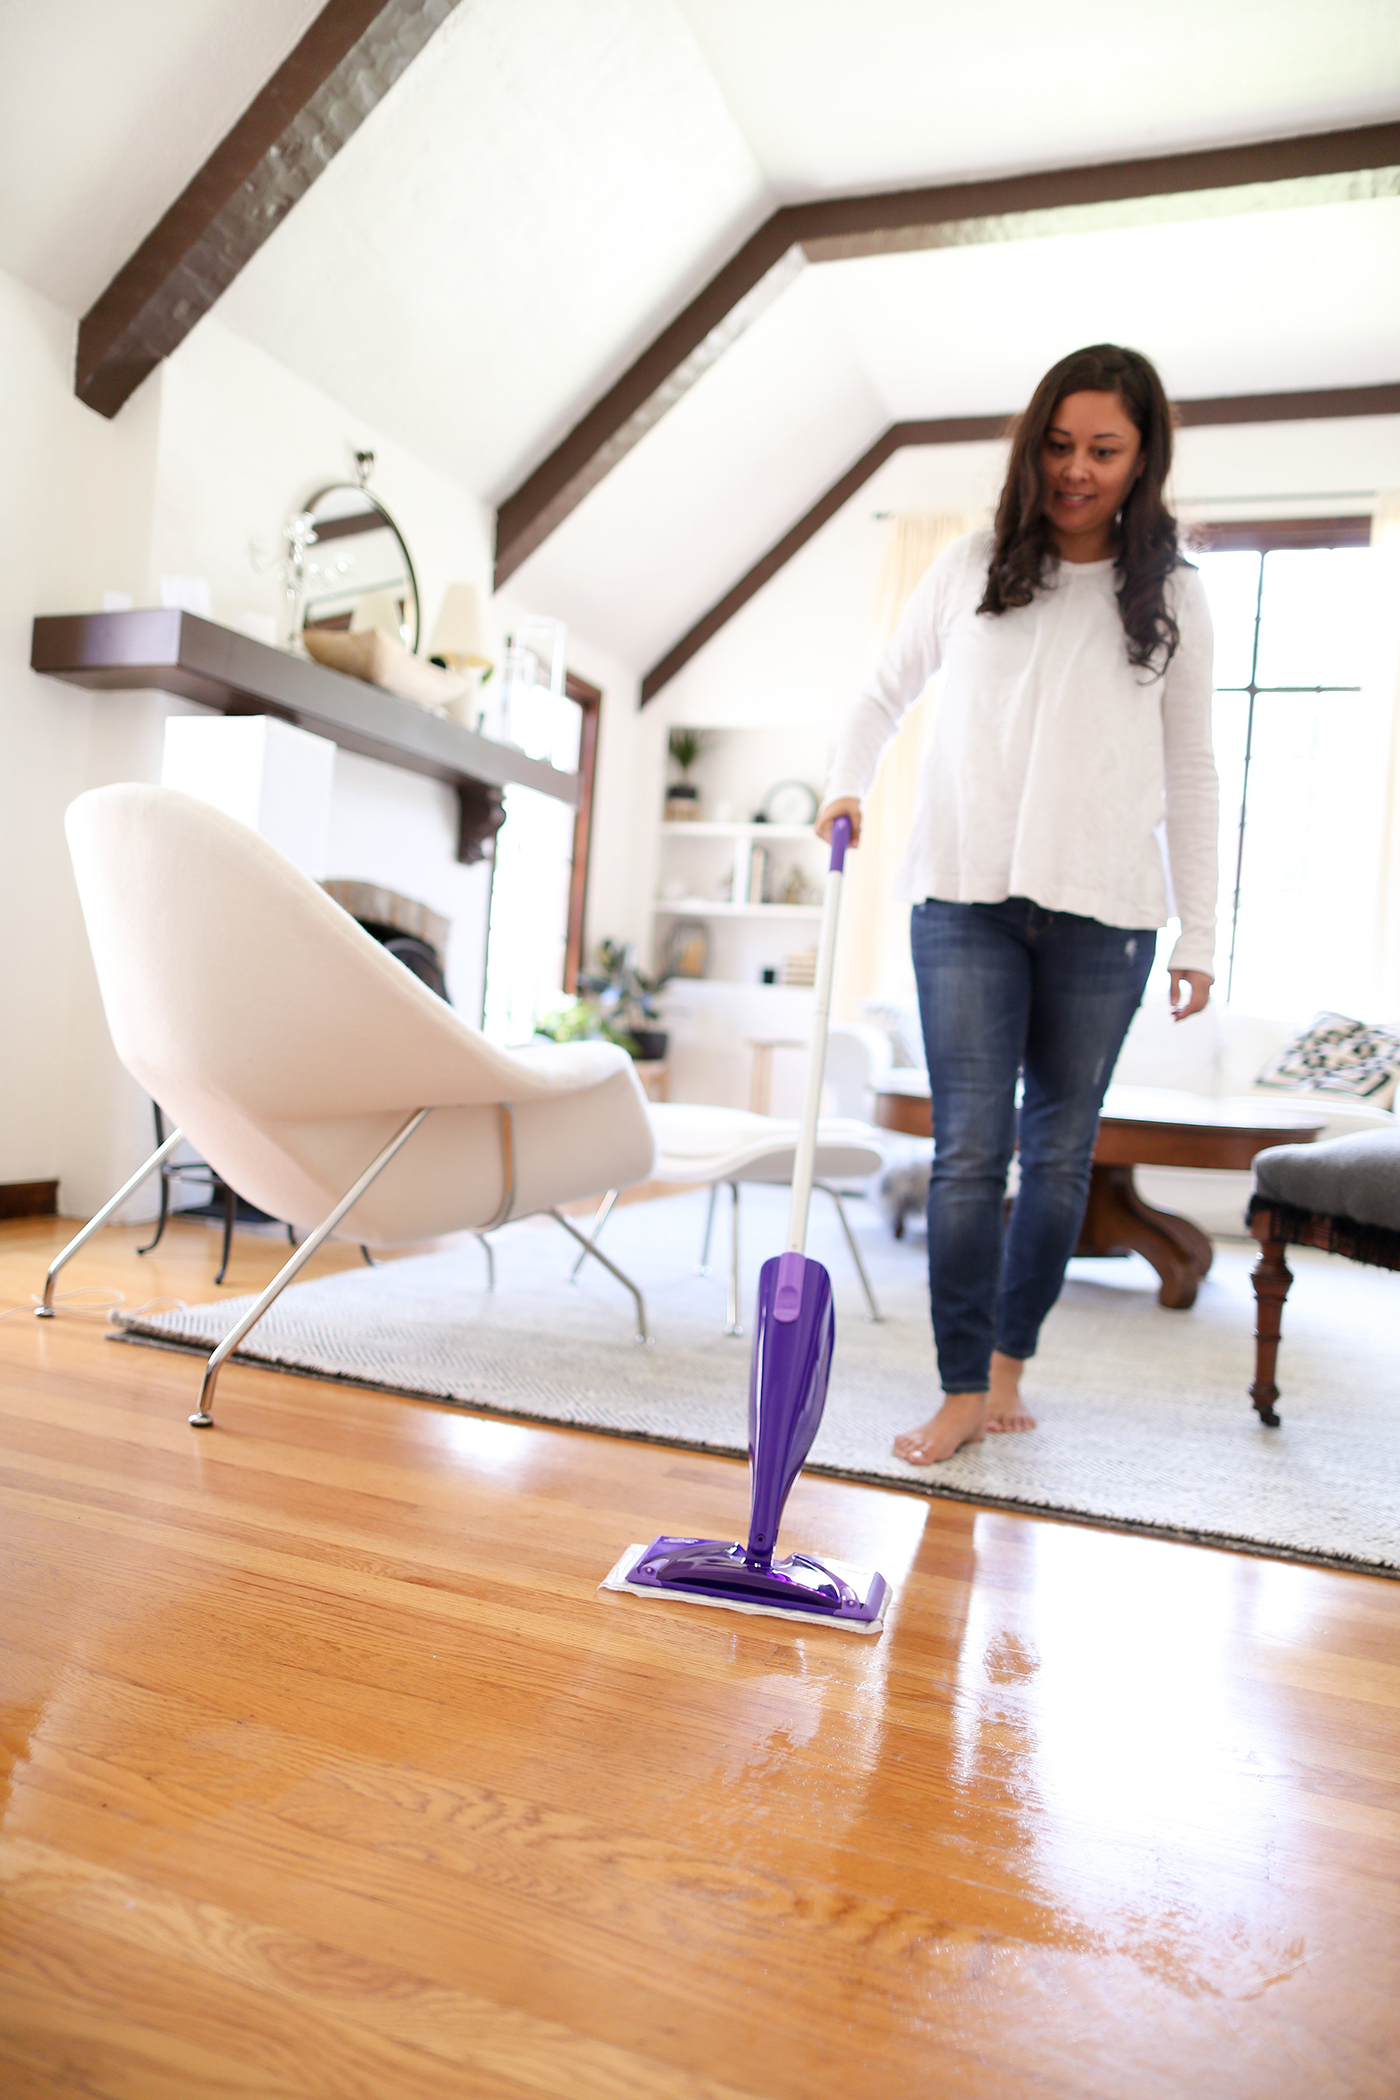 Copy Cat Chic tips & tricks on keeping your new home as clean as the day you moved in. Keep a clean slate by organizing and cleaning with Mr Clean & Swiffer